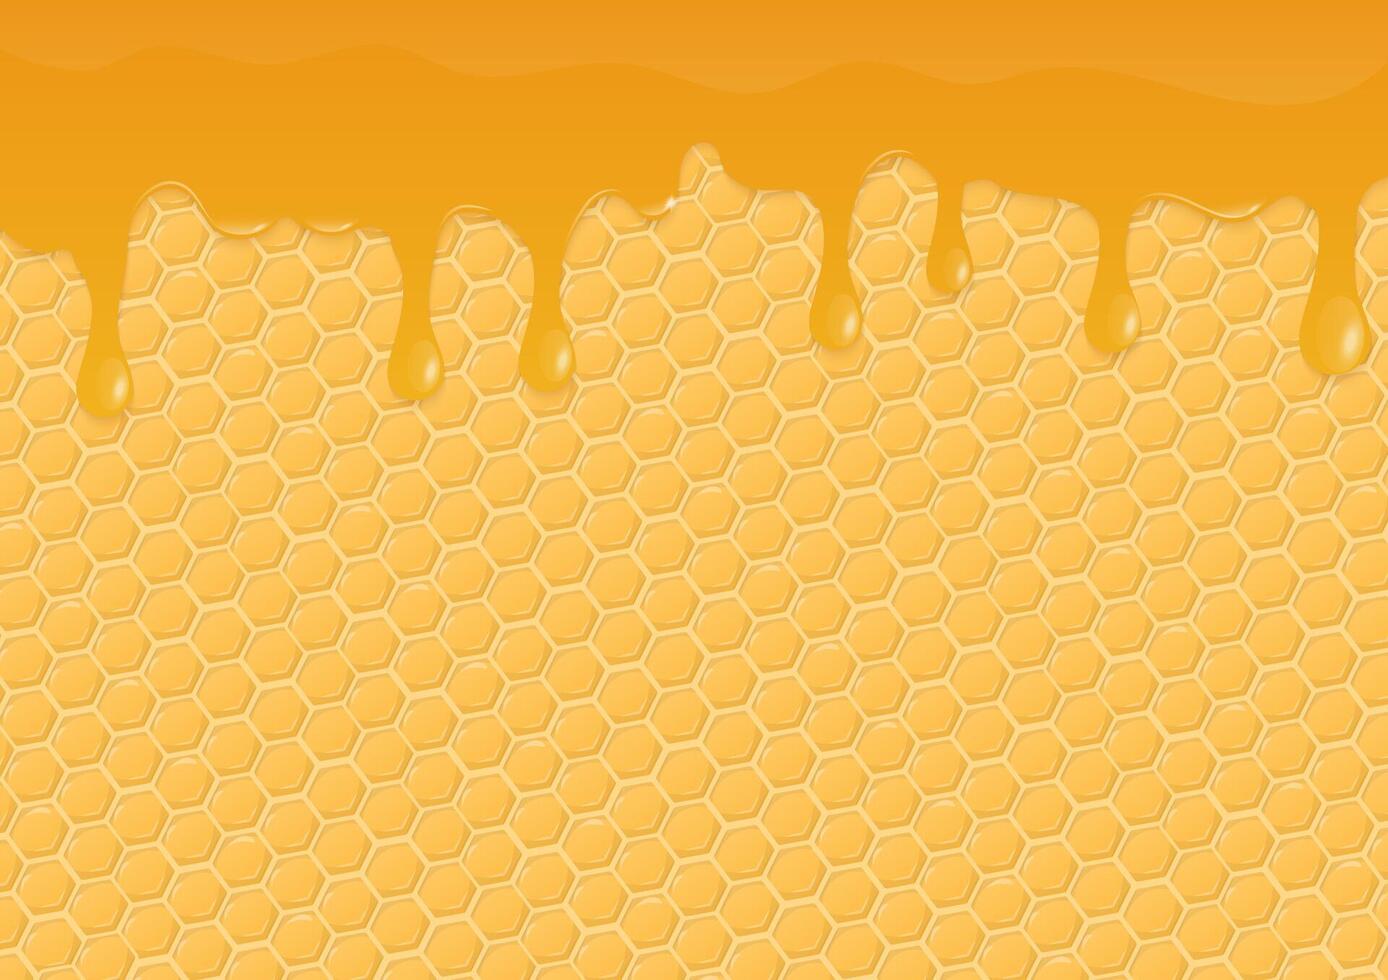 Dripping honey with honeycomb background vector